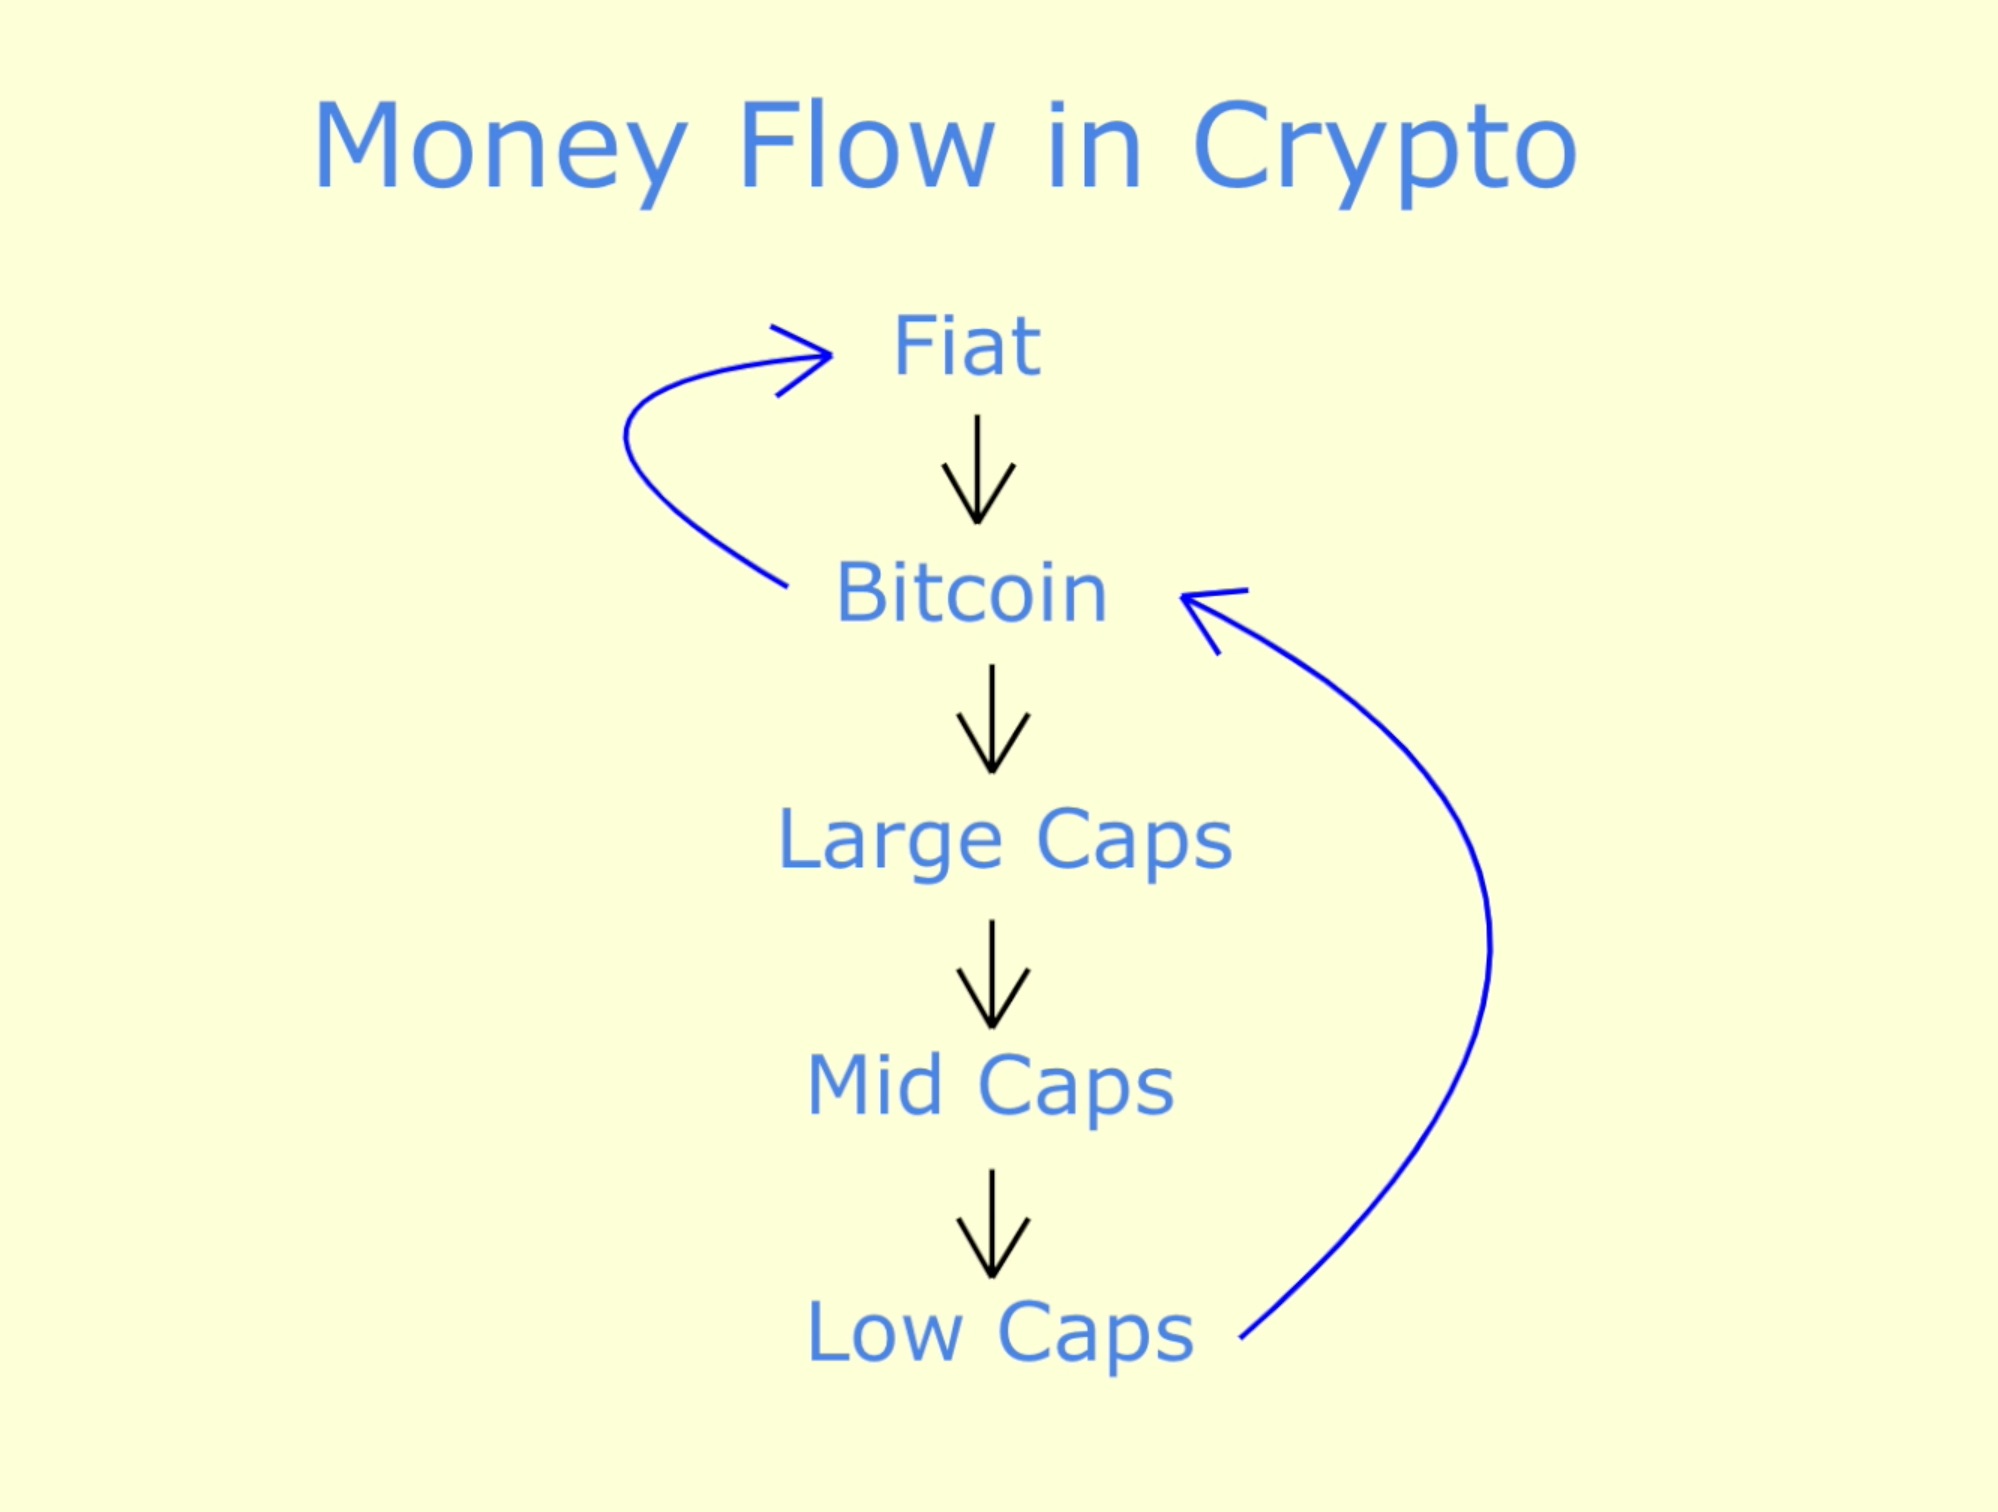 /the-2020-crypto-money-flow-cycle-ht1b3eaj feature image